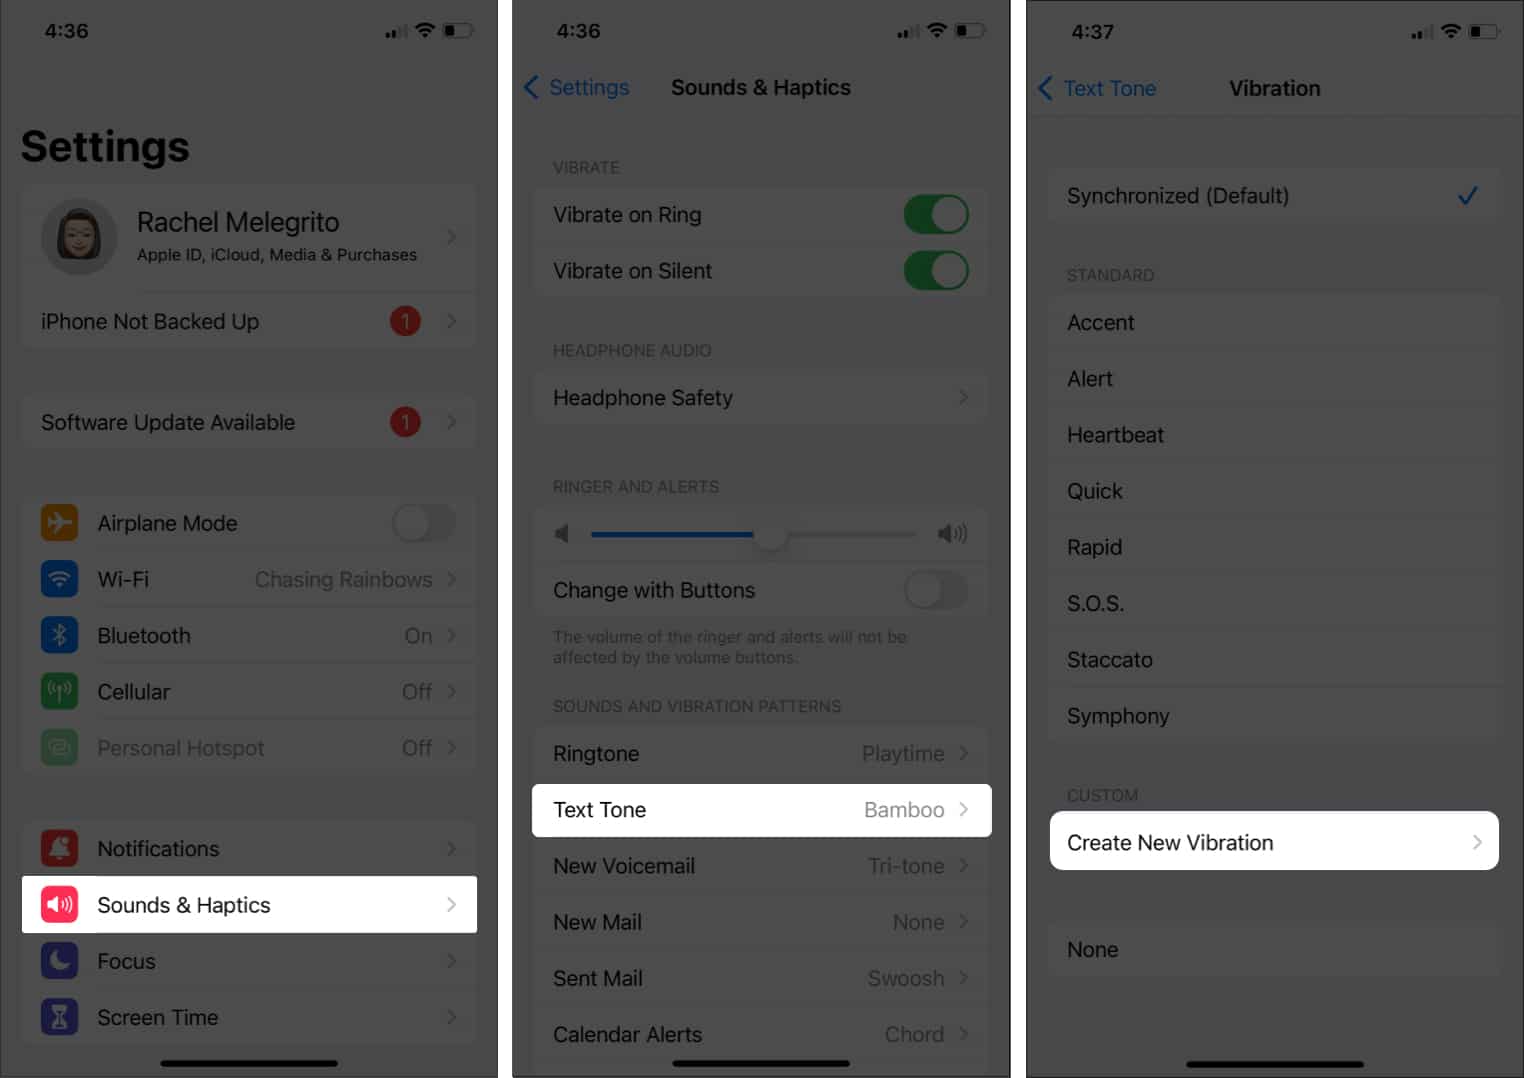 Create New Vibration from iPhone's Settings